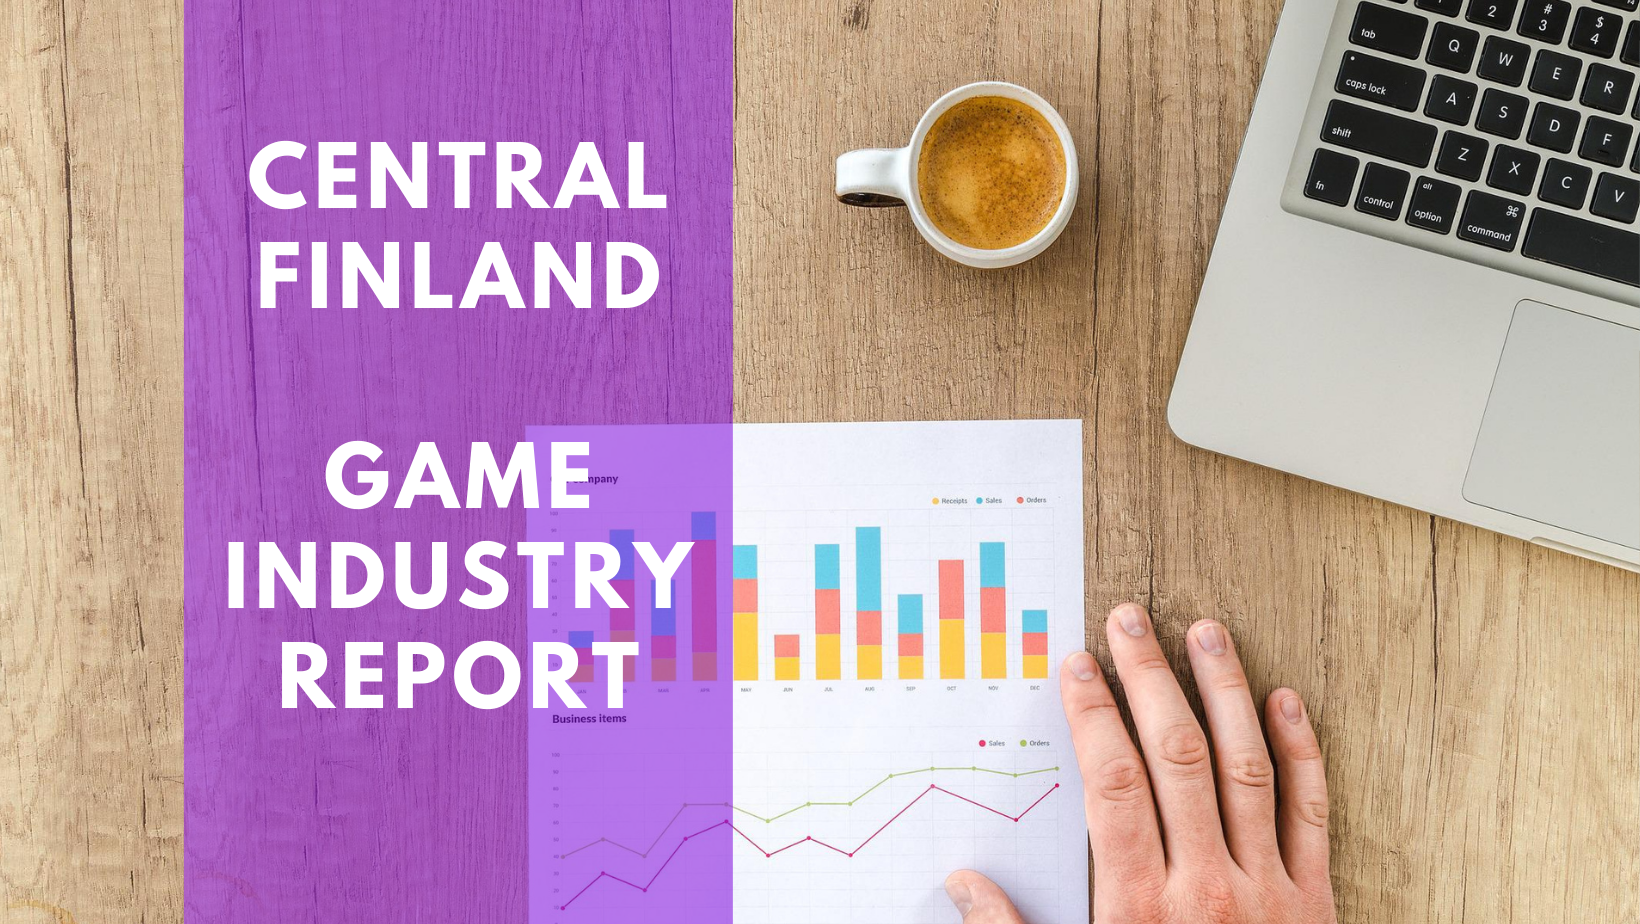 Game Insustry report Central Finland